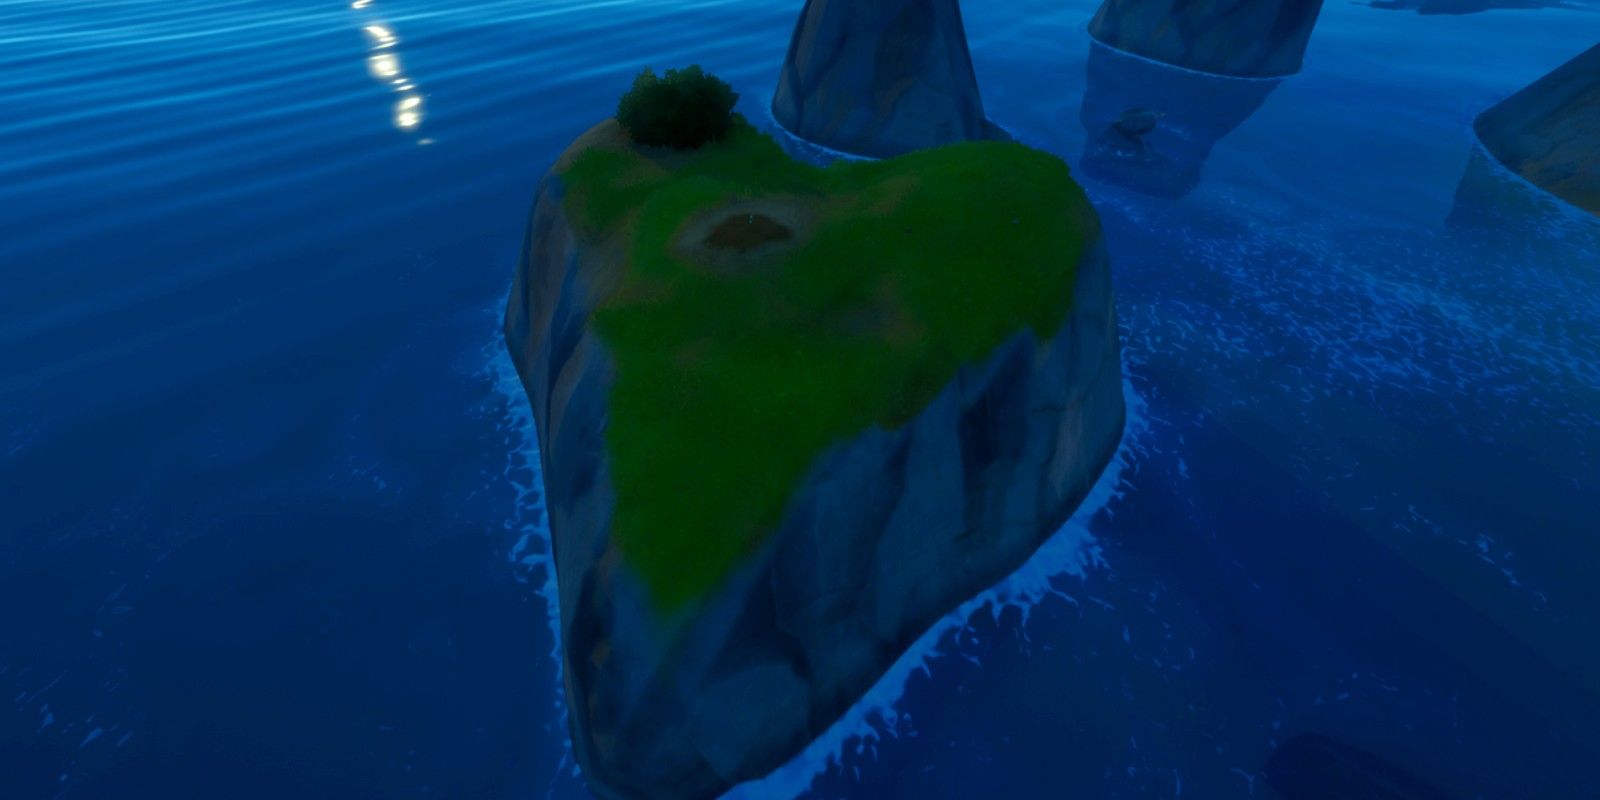 The Heart-Shaped island is located past Sweaty Sands in Fortnite Season 4